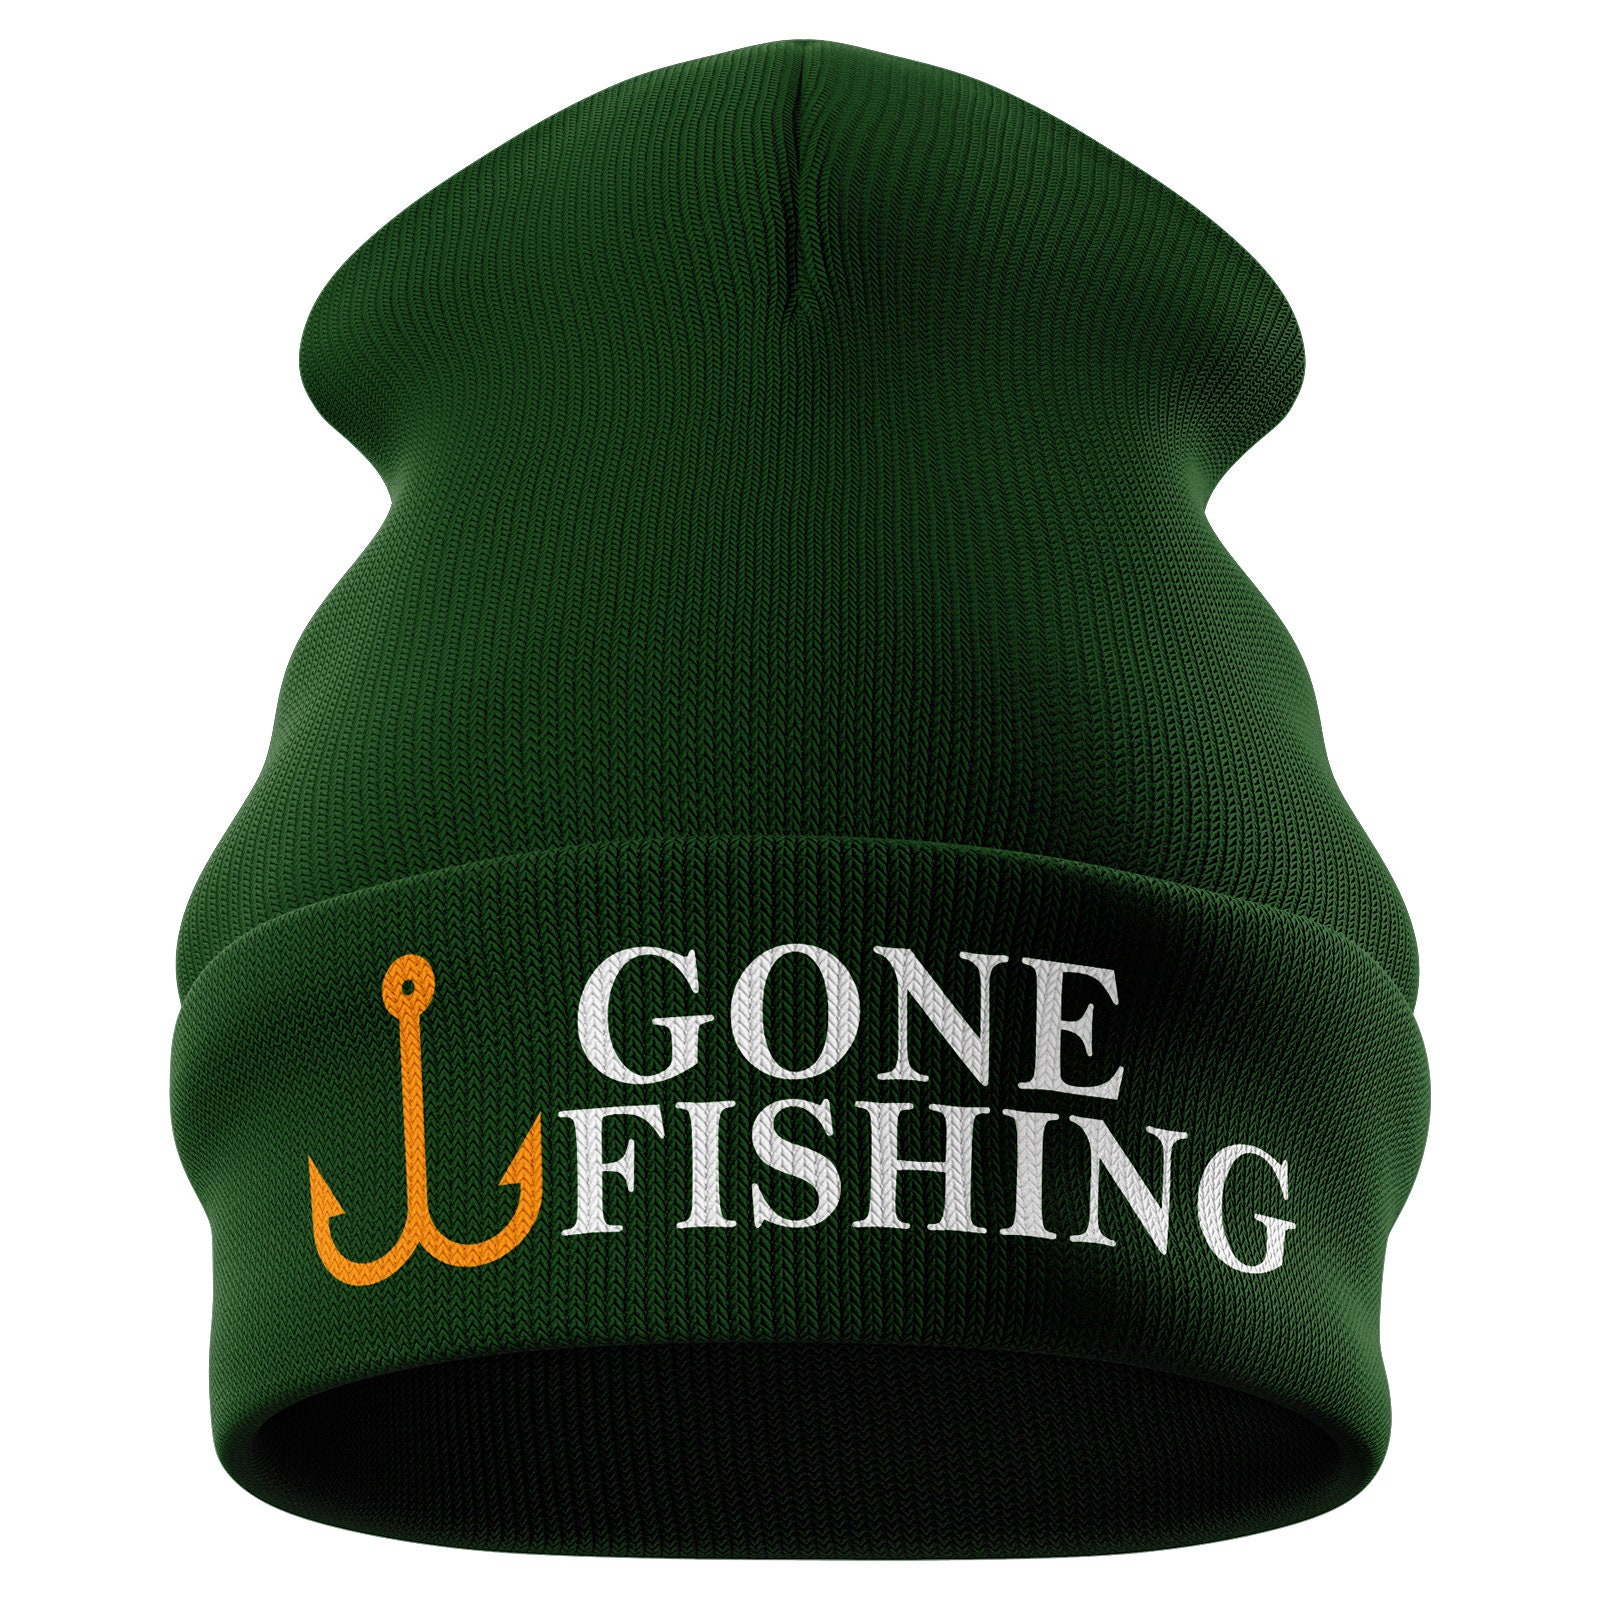 Gone Fishing Beanie Hat, EMBROIDERED Beanie, Funny Fishing Gift, Fishing  Gifts for Him, Fisherman Winter Headwear Unisex -  Ireland